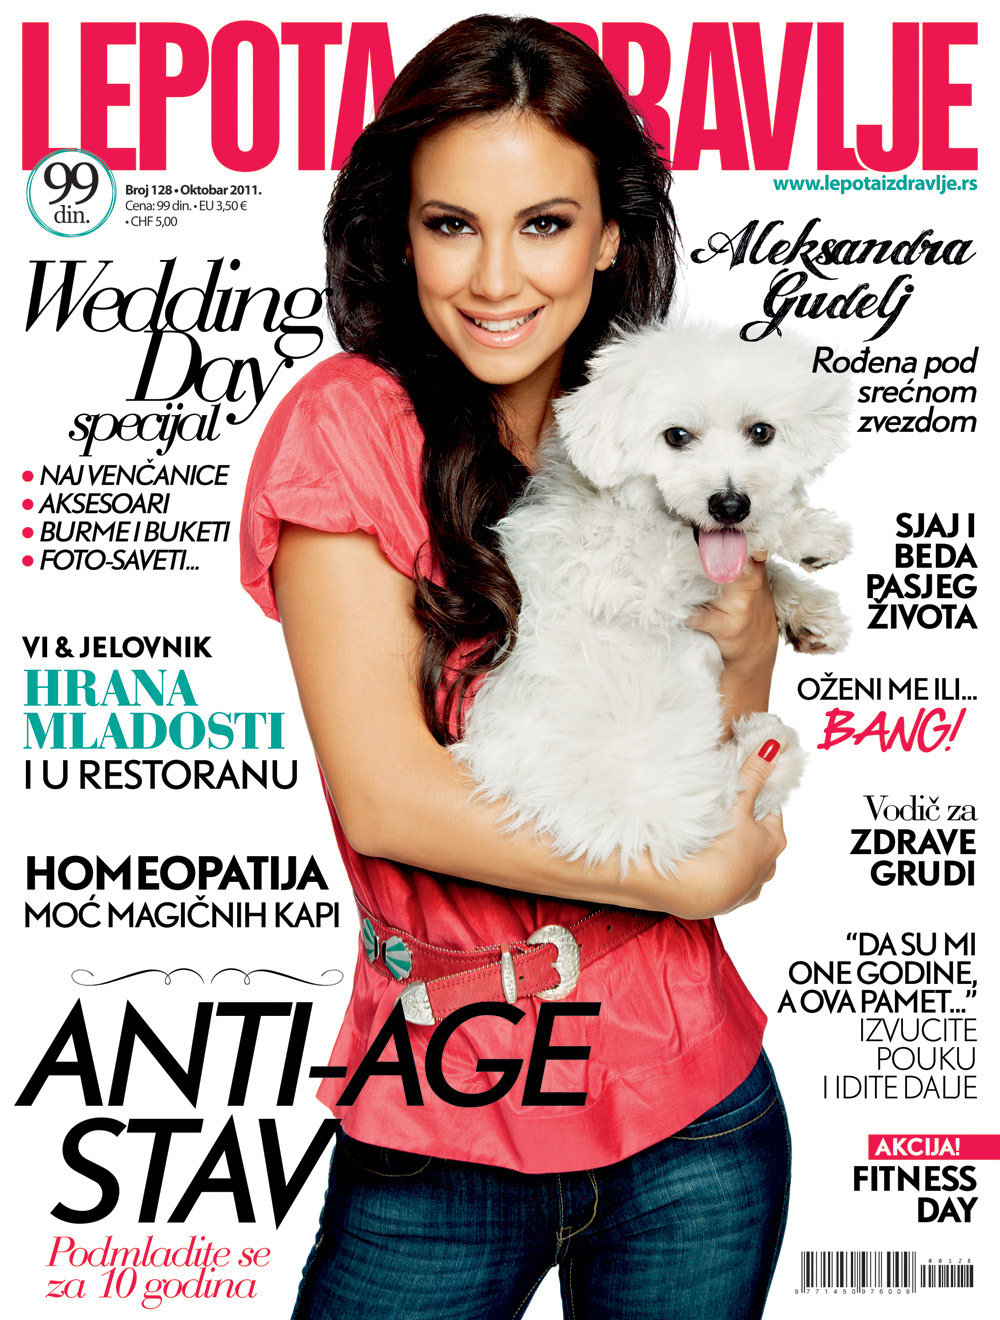 covers magazine Layout design frontpage